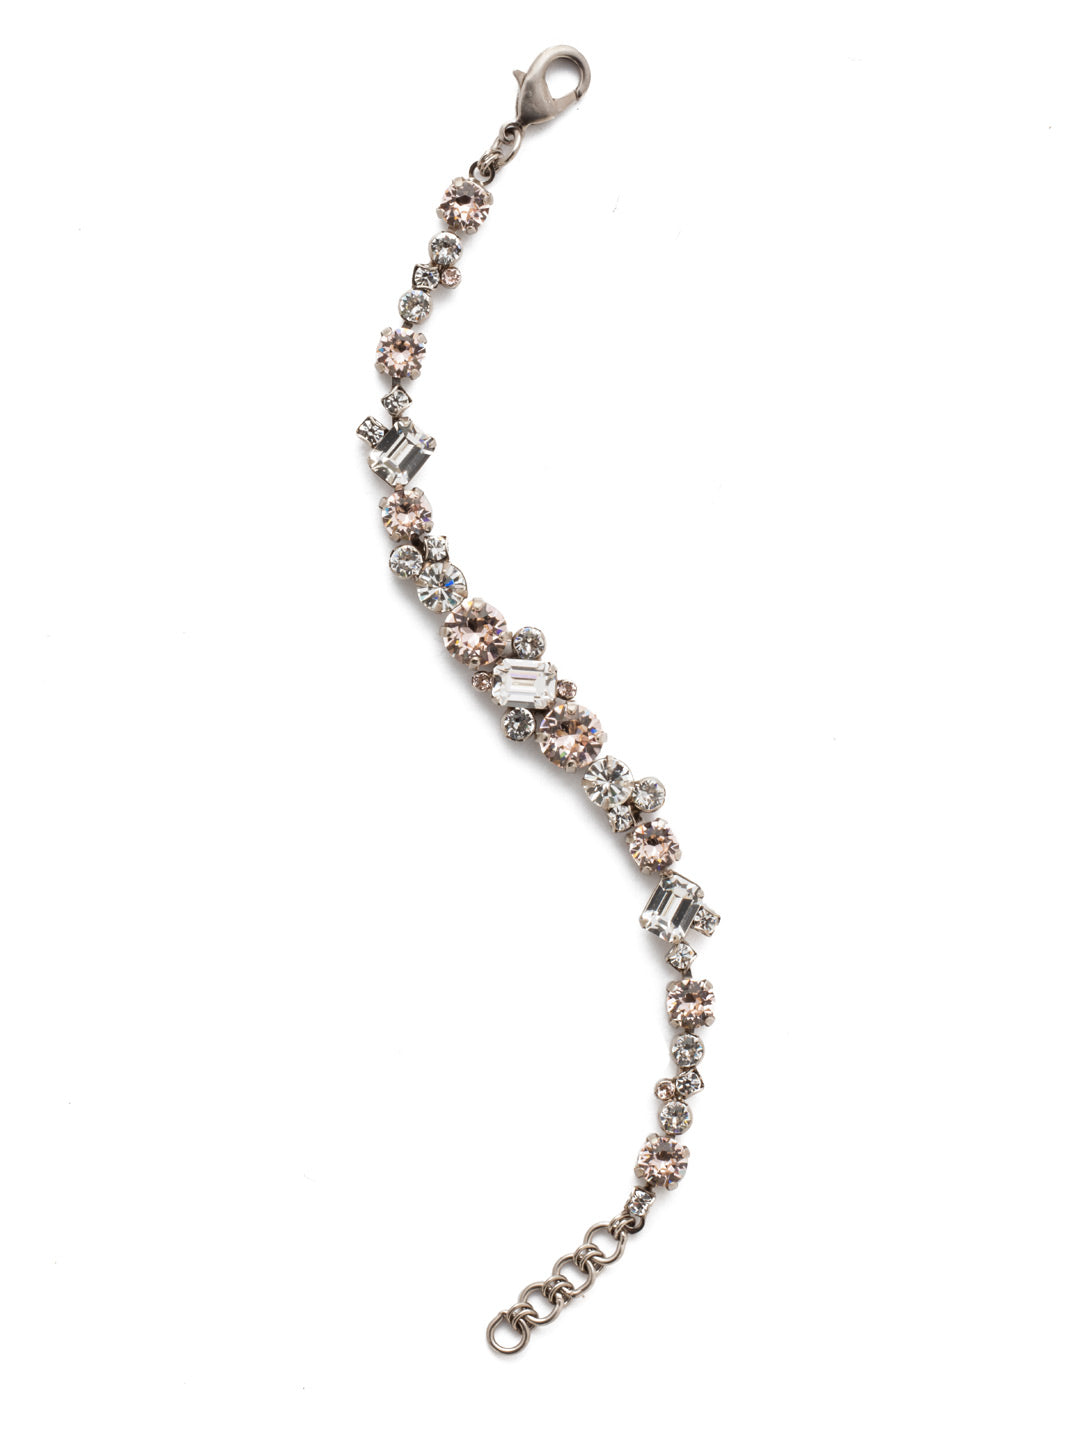 Geo Classic Tennis Bracelet - BDG46ASPLS - <p>Delicate round crystals mix with emerald cut crystals for a classic and elegant look. From Sorrelli's Soft Petal collection in our Antique Silver-tone finish.</p>